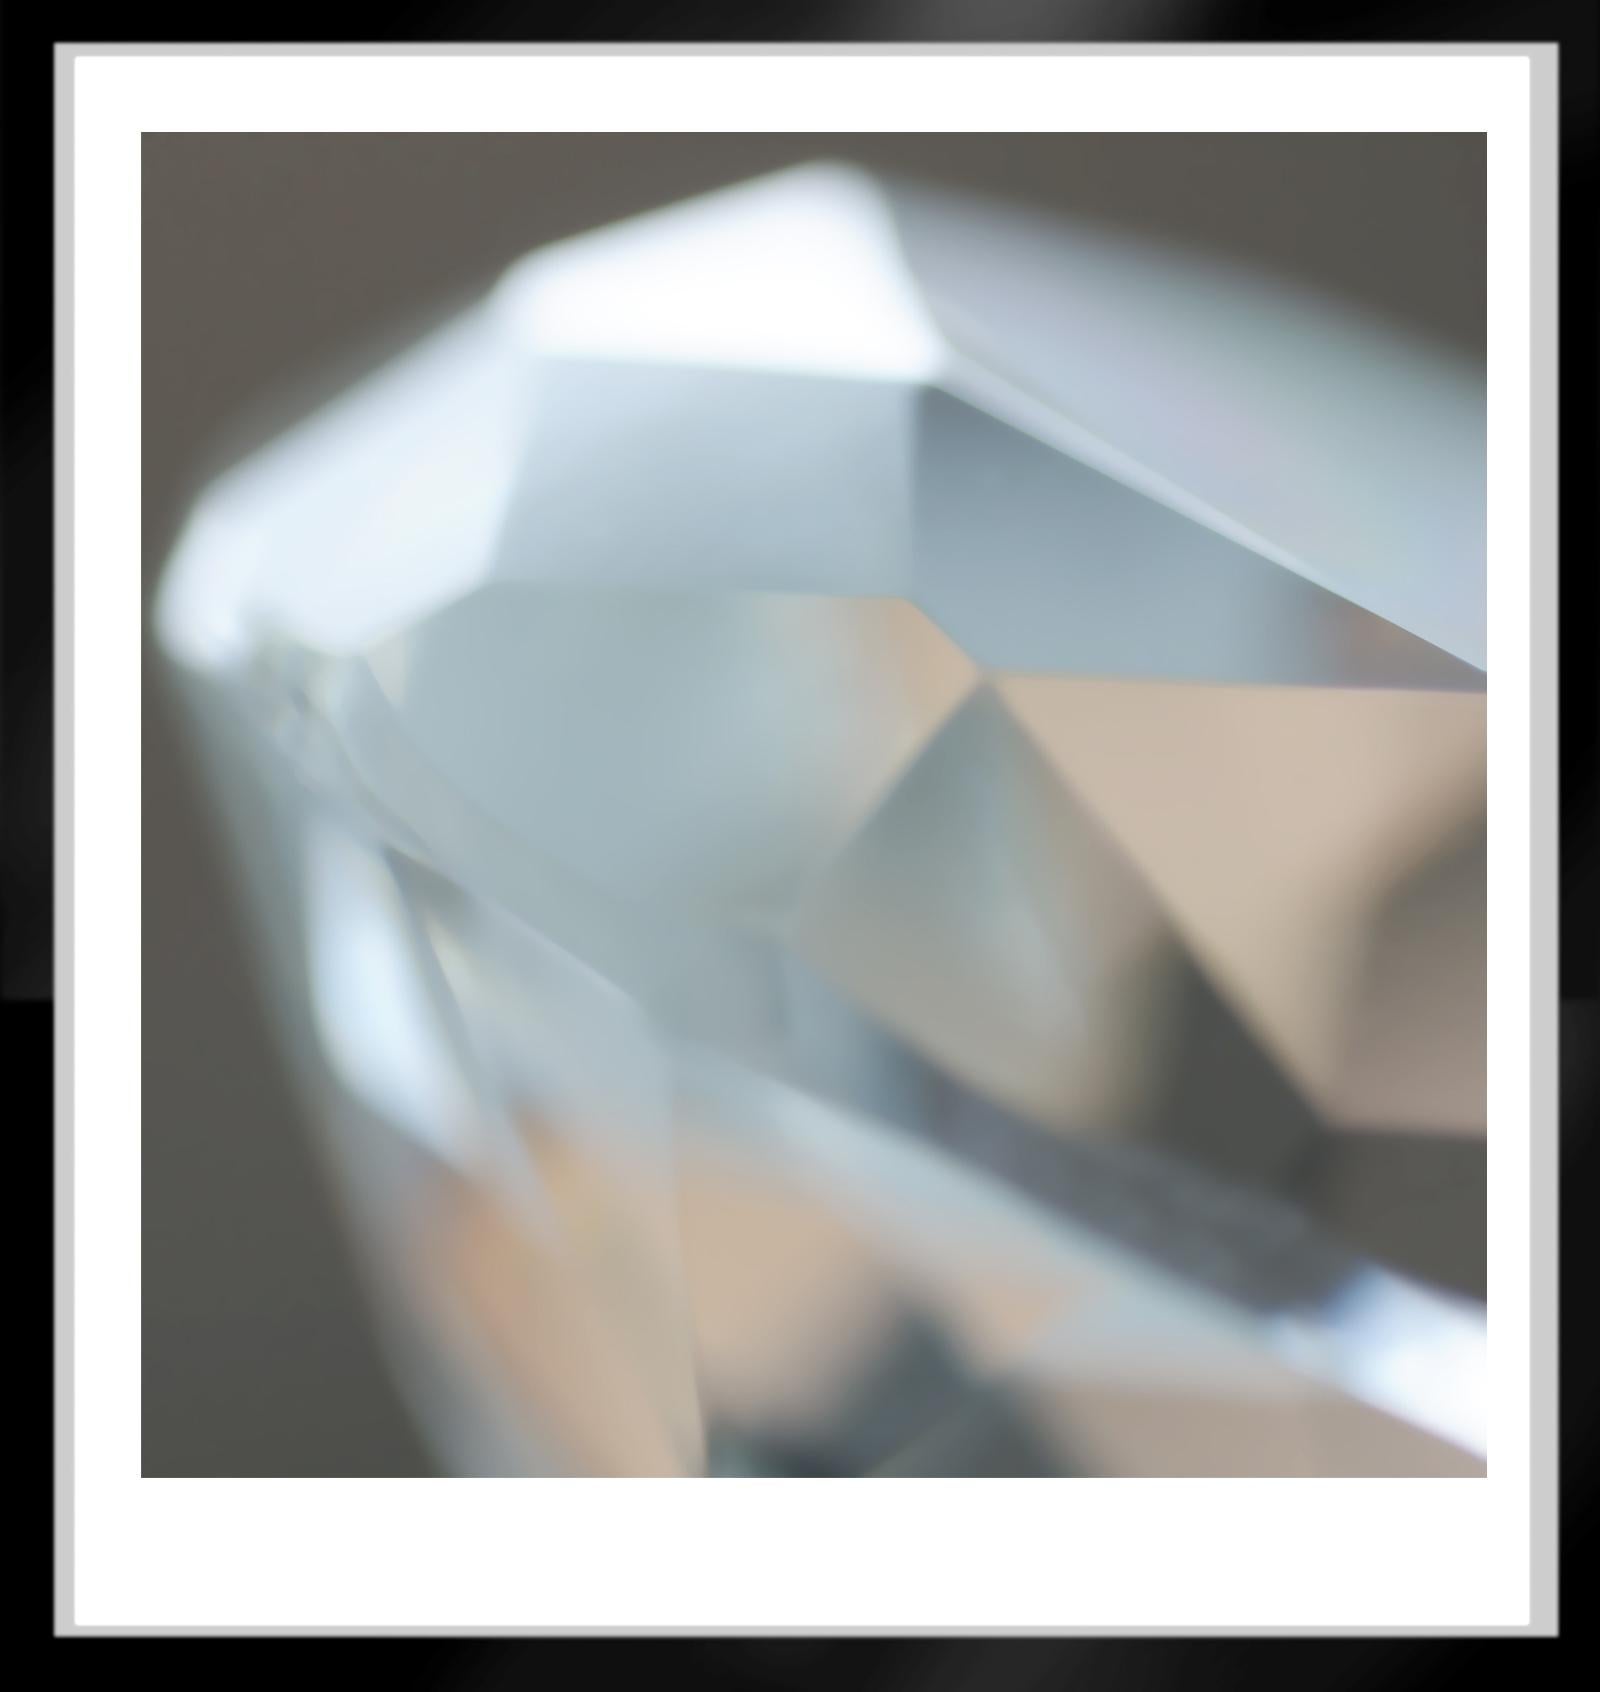 Bling 11 -Signed limited edition art print, Contemporary abstract, Square format - Gray Color Photograph by Michael Banks